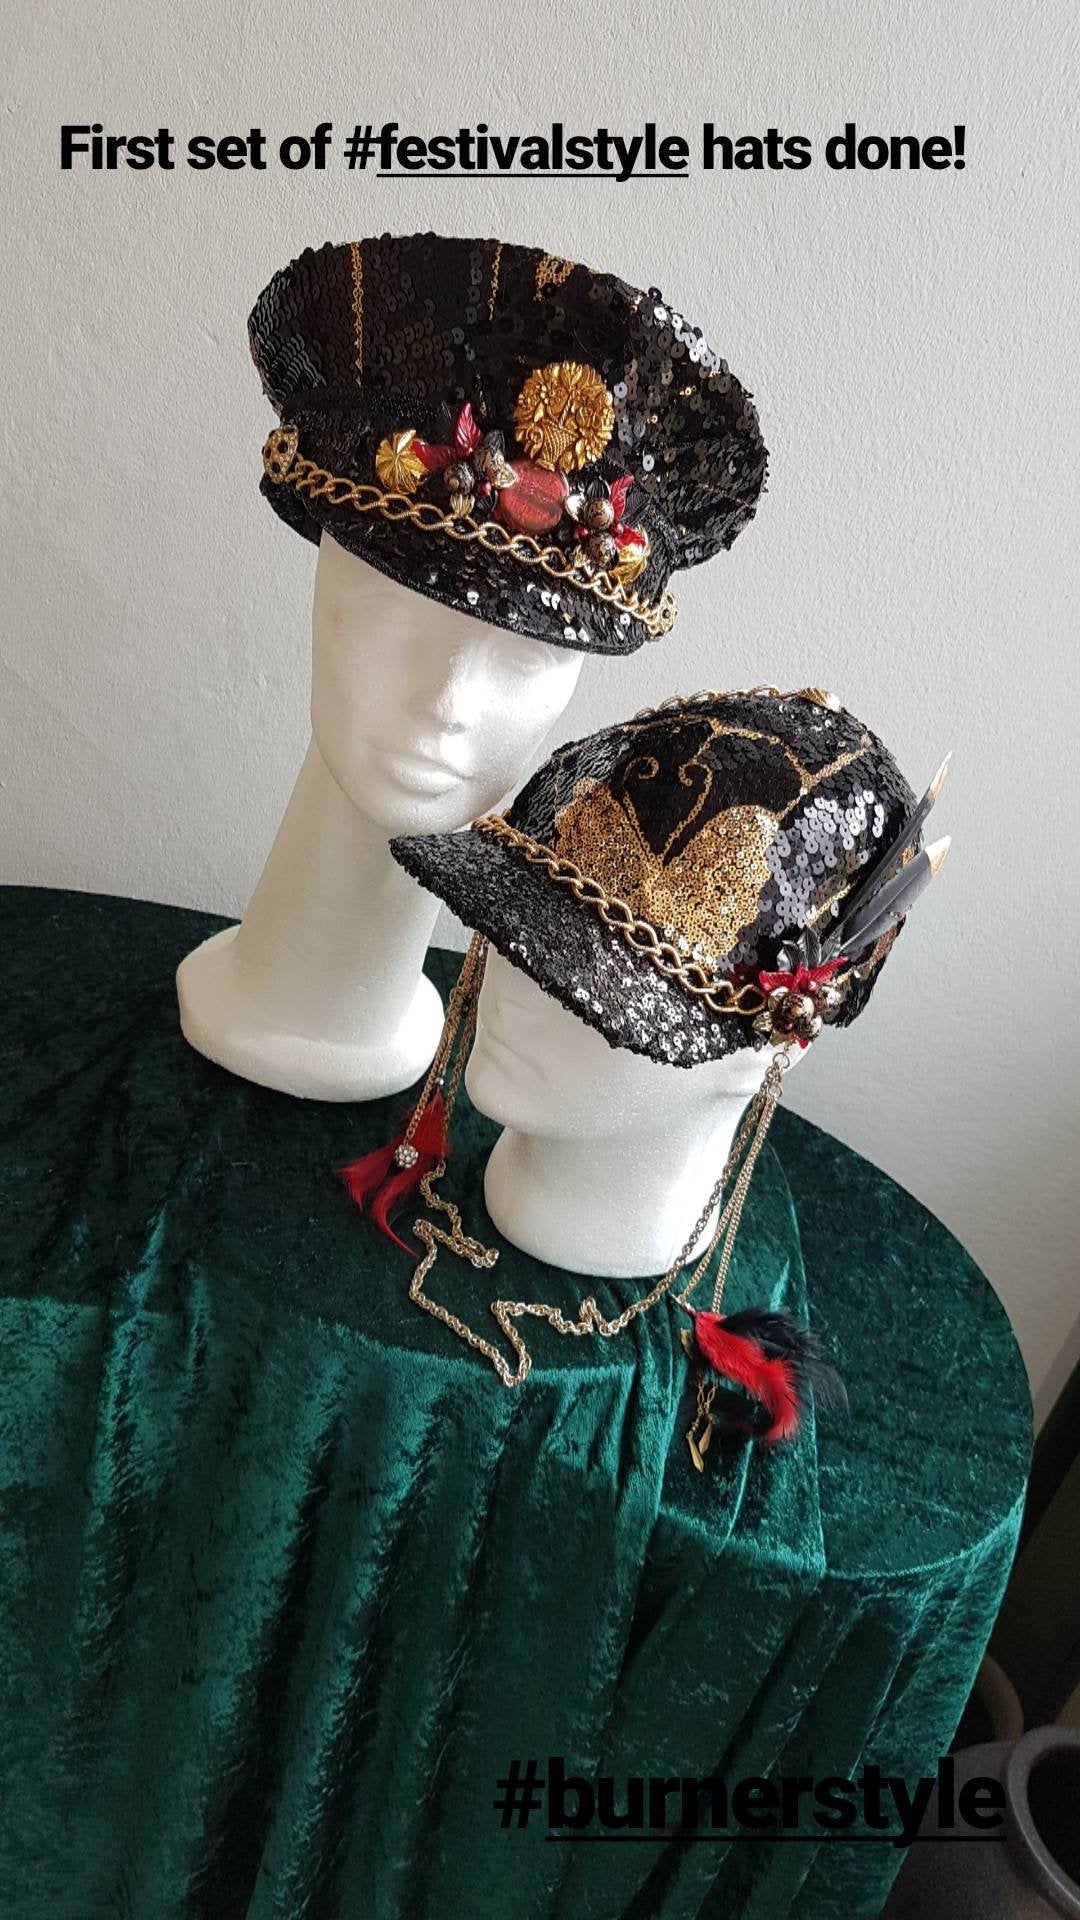 Double Trouble mini collection: The Glamstar's Paradise Festival Cap